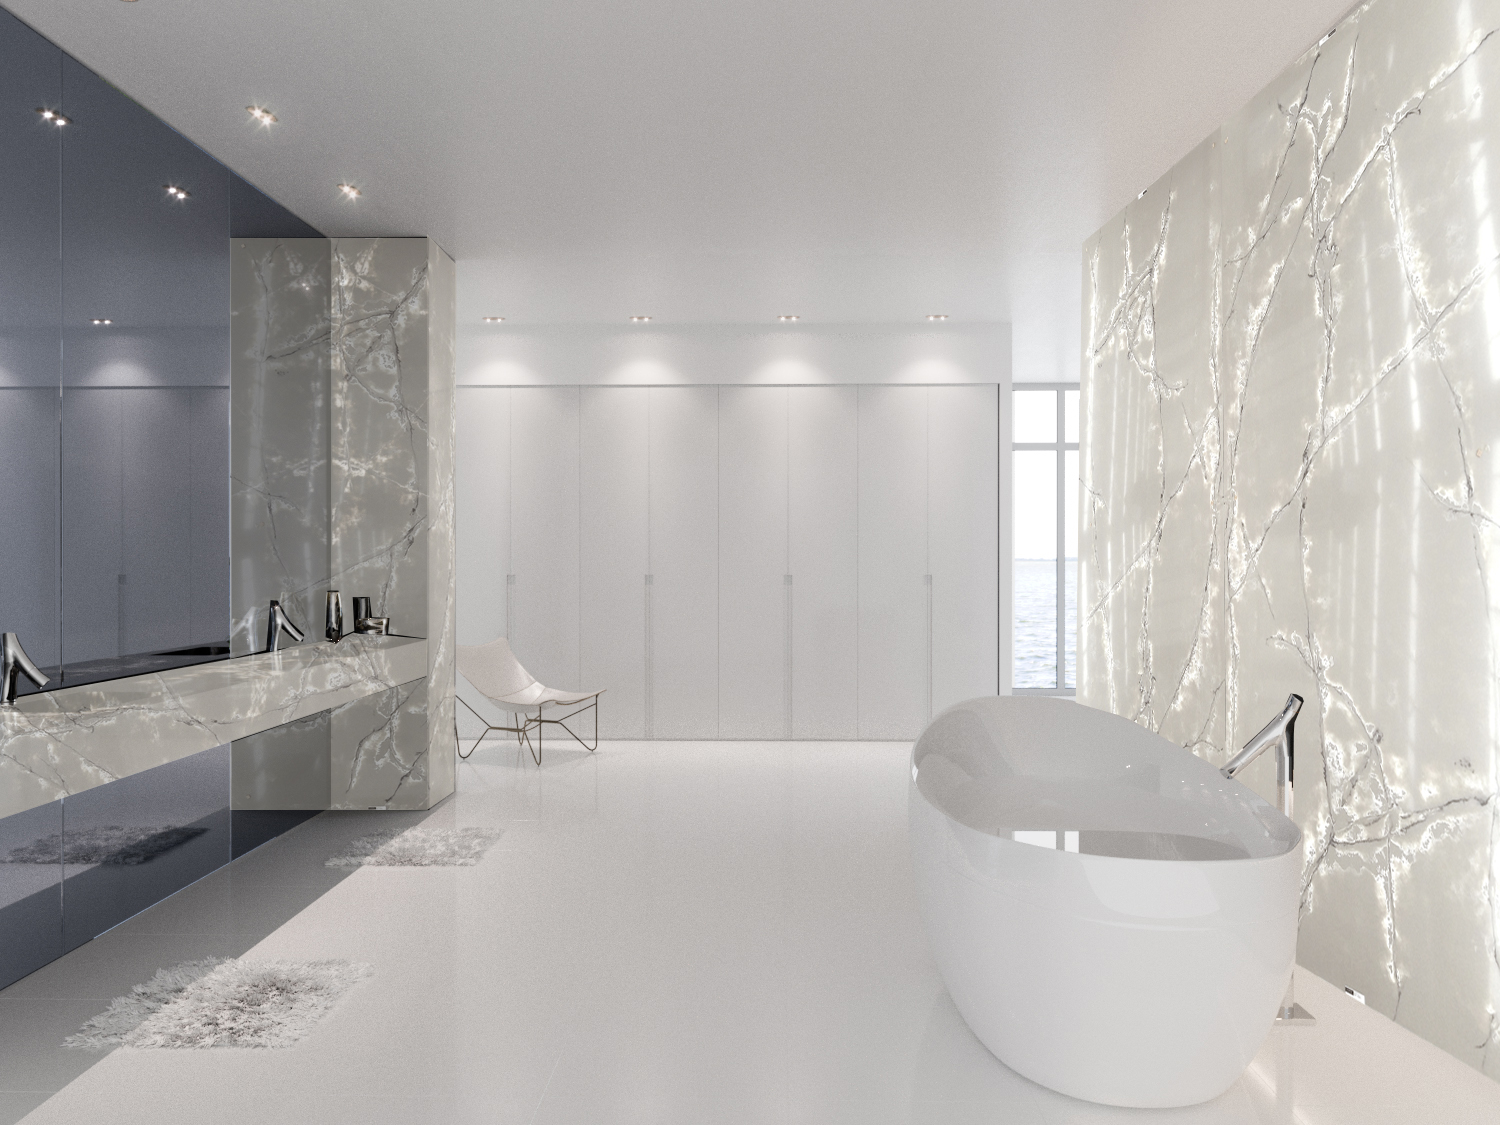 The technology of materials in bath design